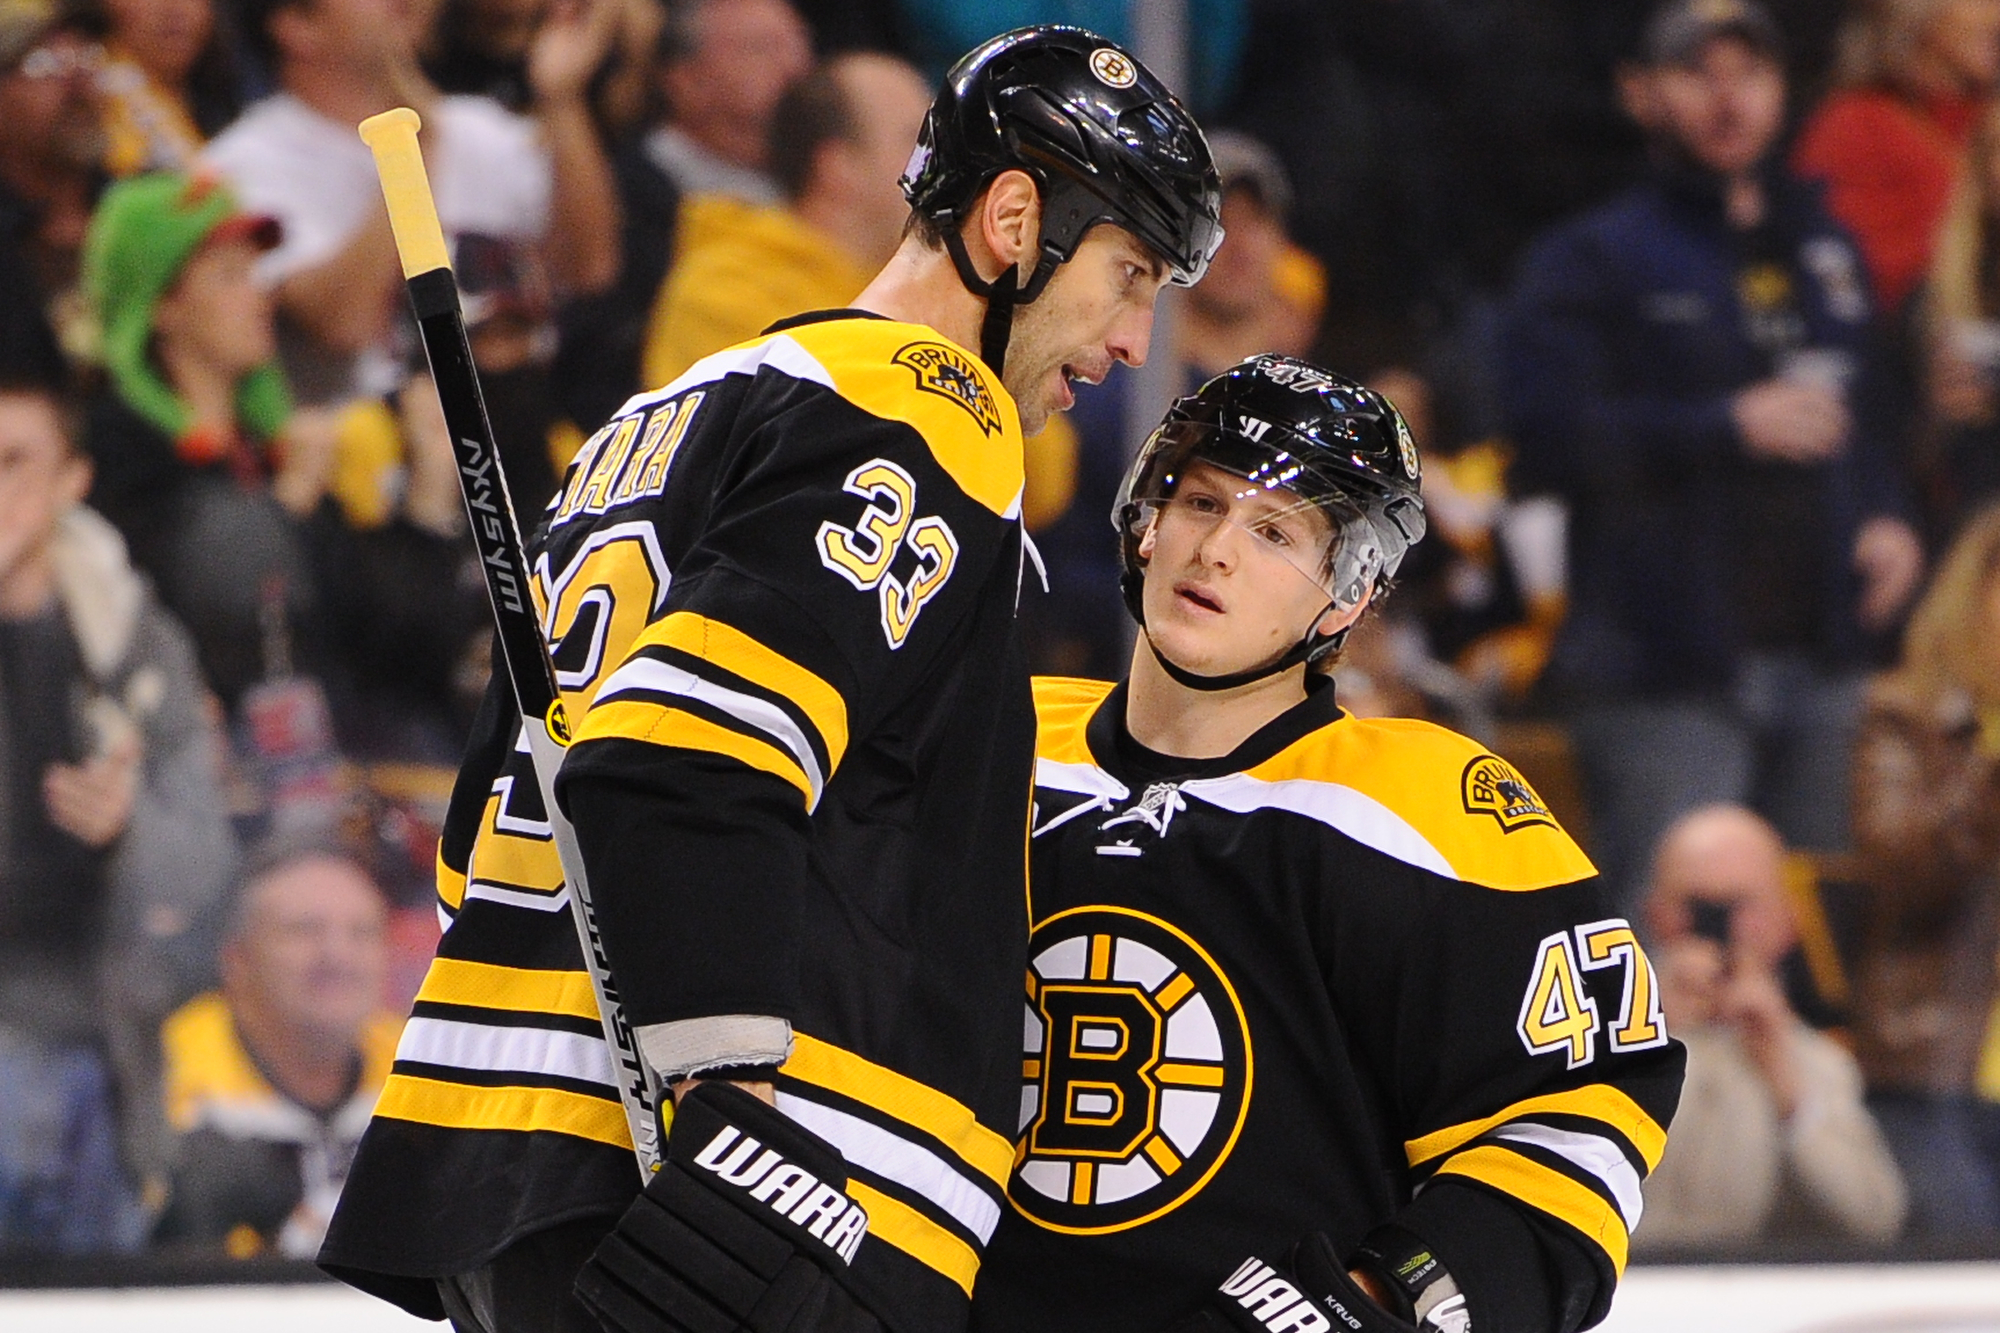 Don't make that guy mad.' Torey Krug's hit exemplified the Bruins' night -  The Boston Globe